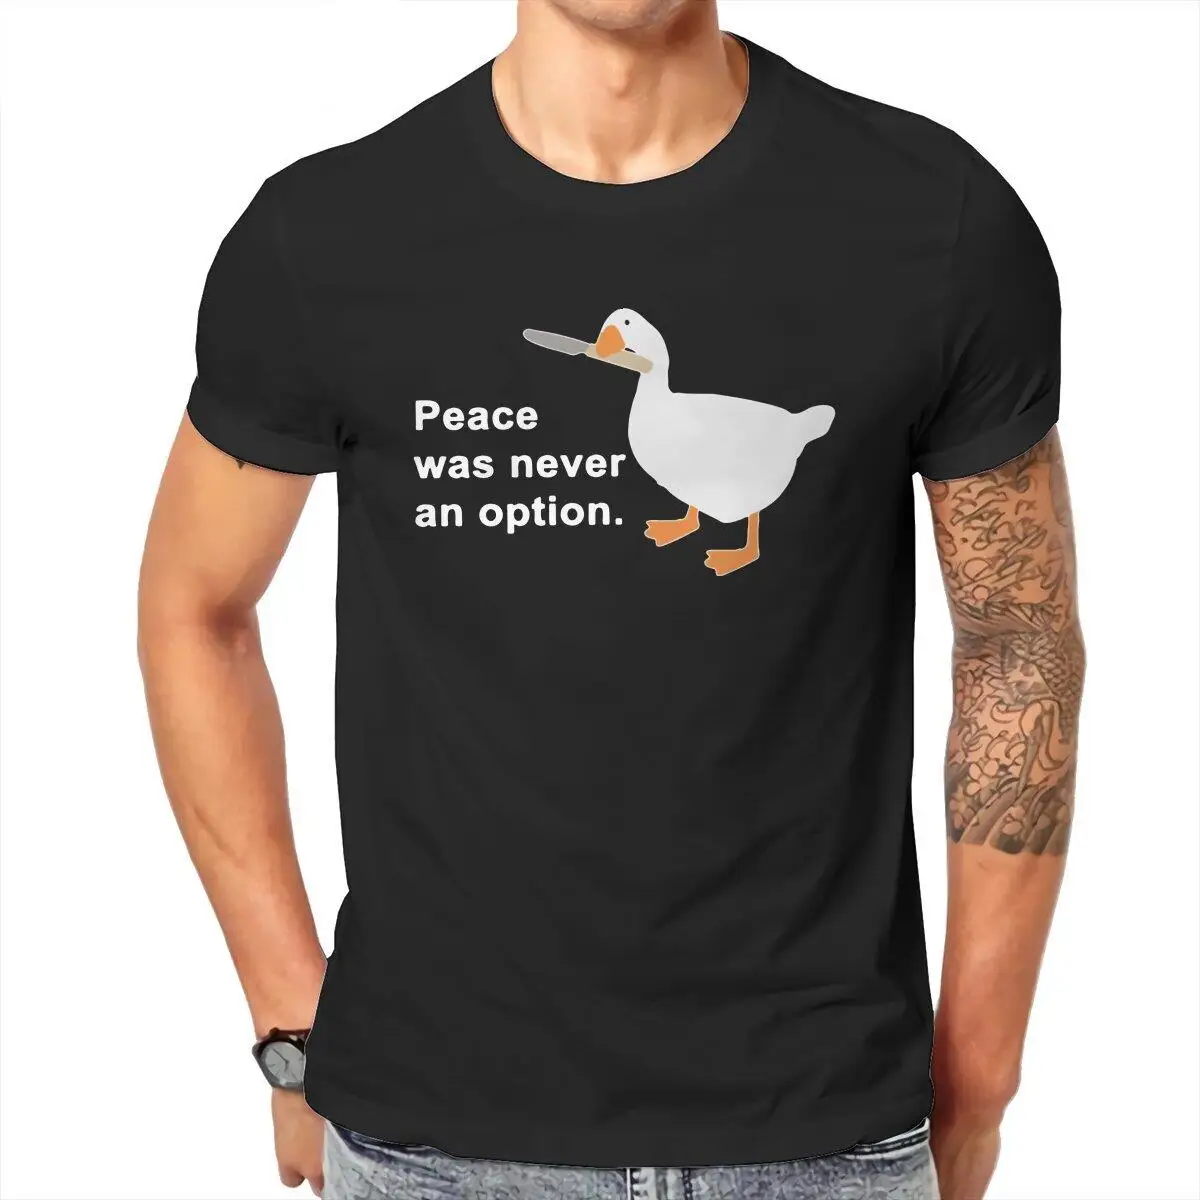 Peace Was Never an Option  T Shirts for Men Pure Cotton Casual T-Shirt Funny Untitled Goose Game Tee Shirt Clothing Plus Size